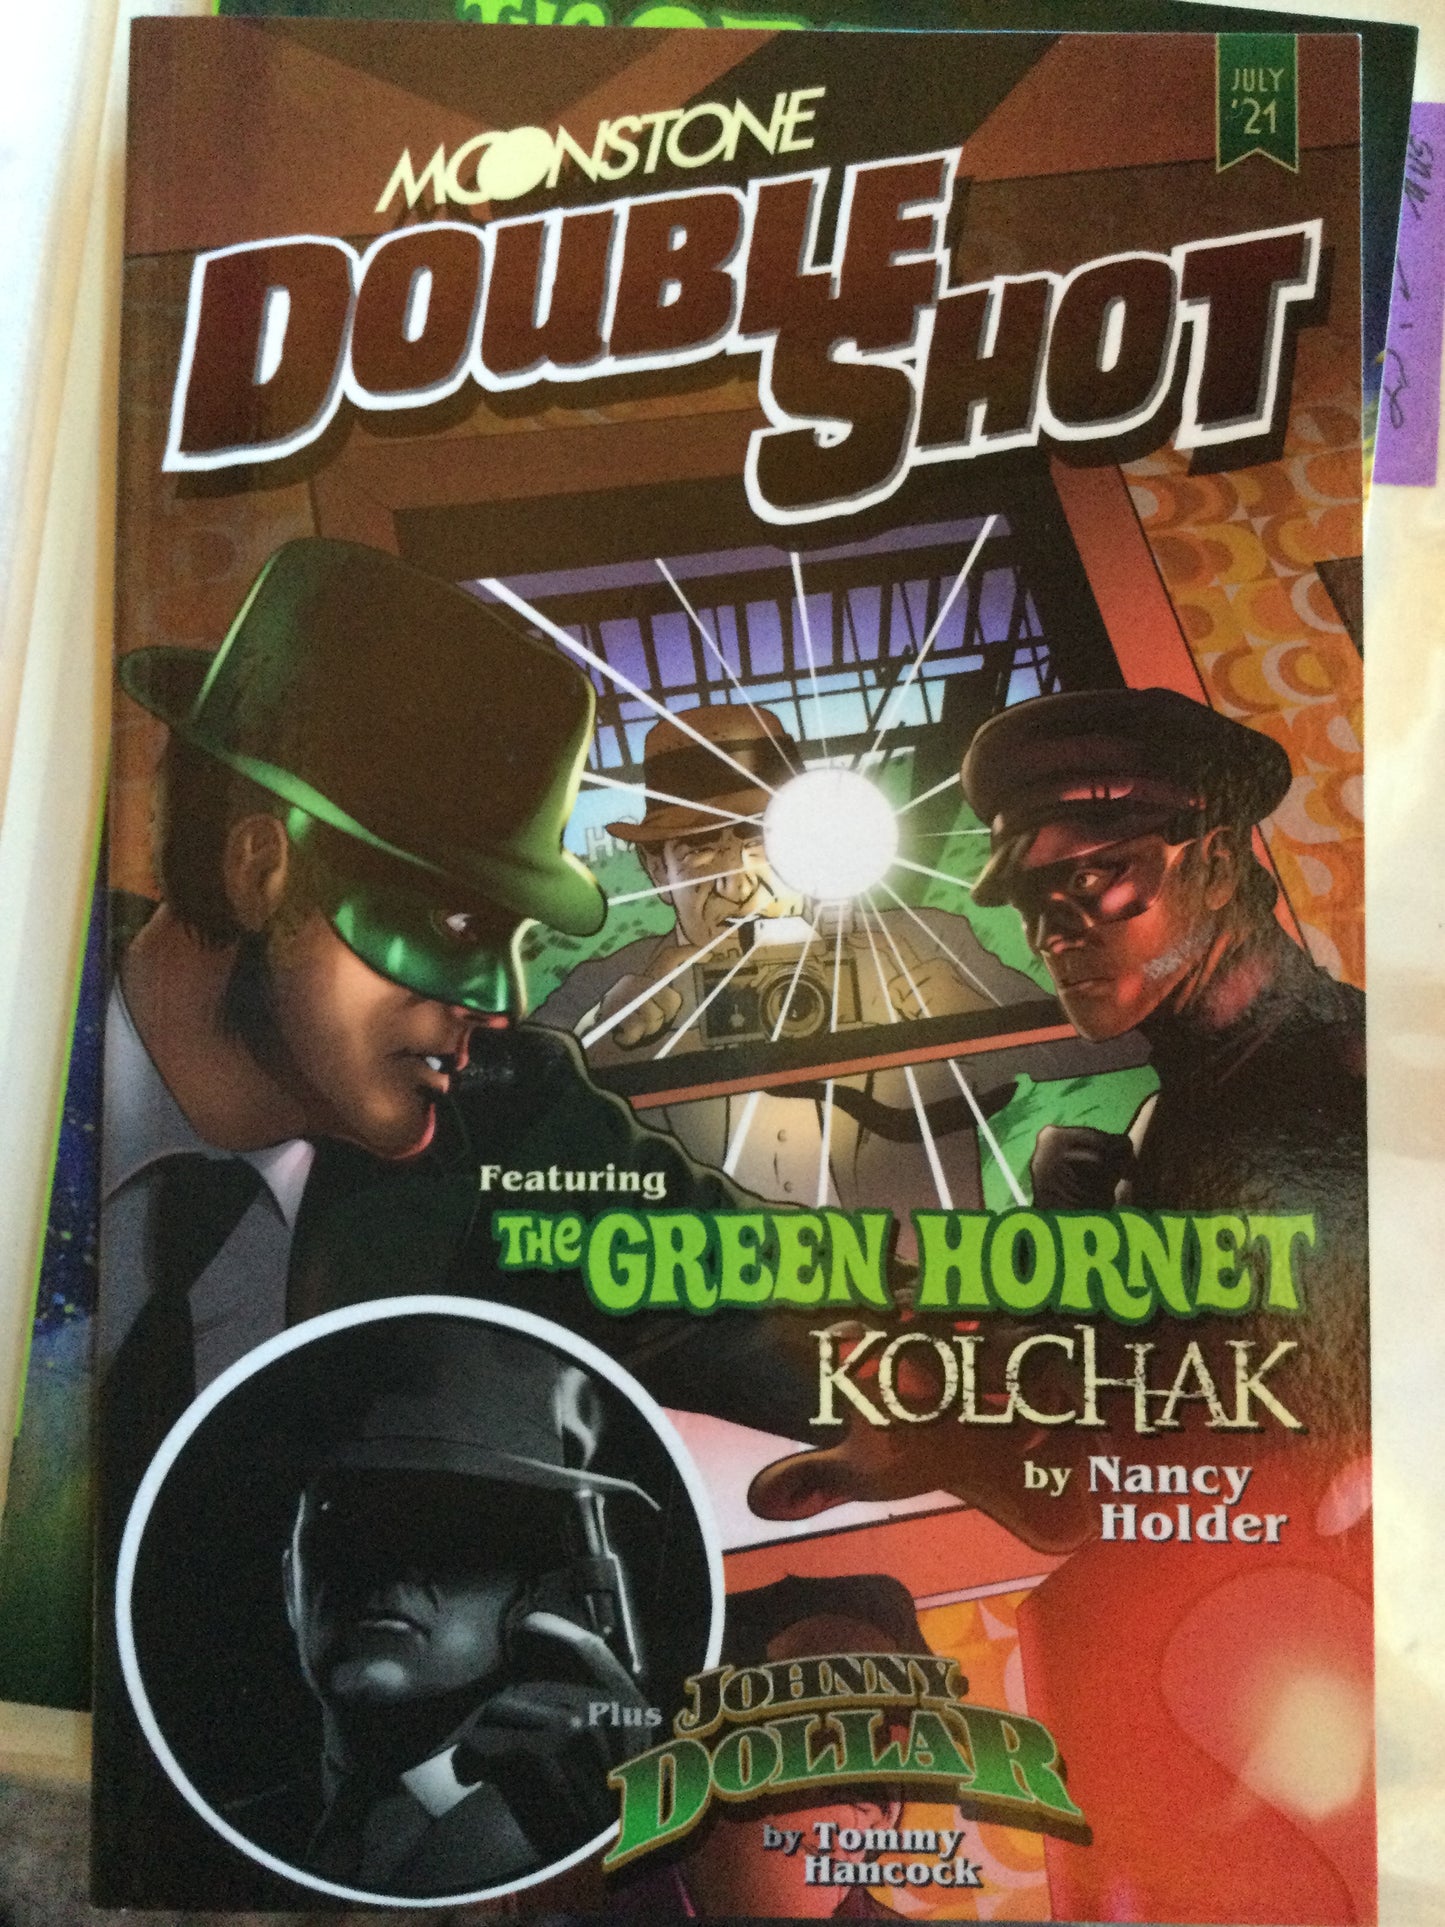 THE GREEN HORNET, book, Tommy Hancock, autograph